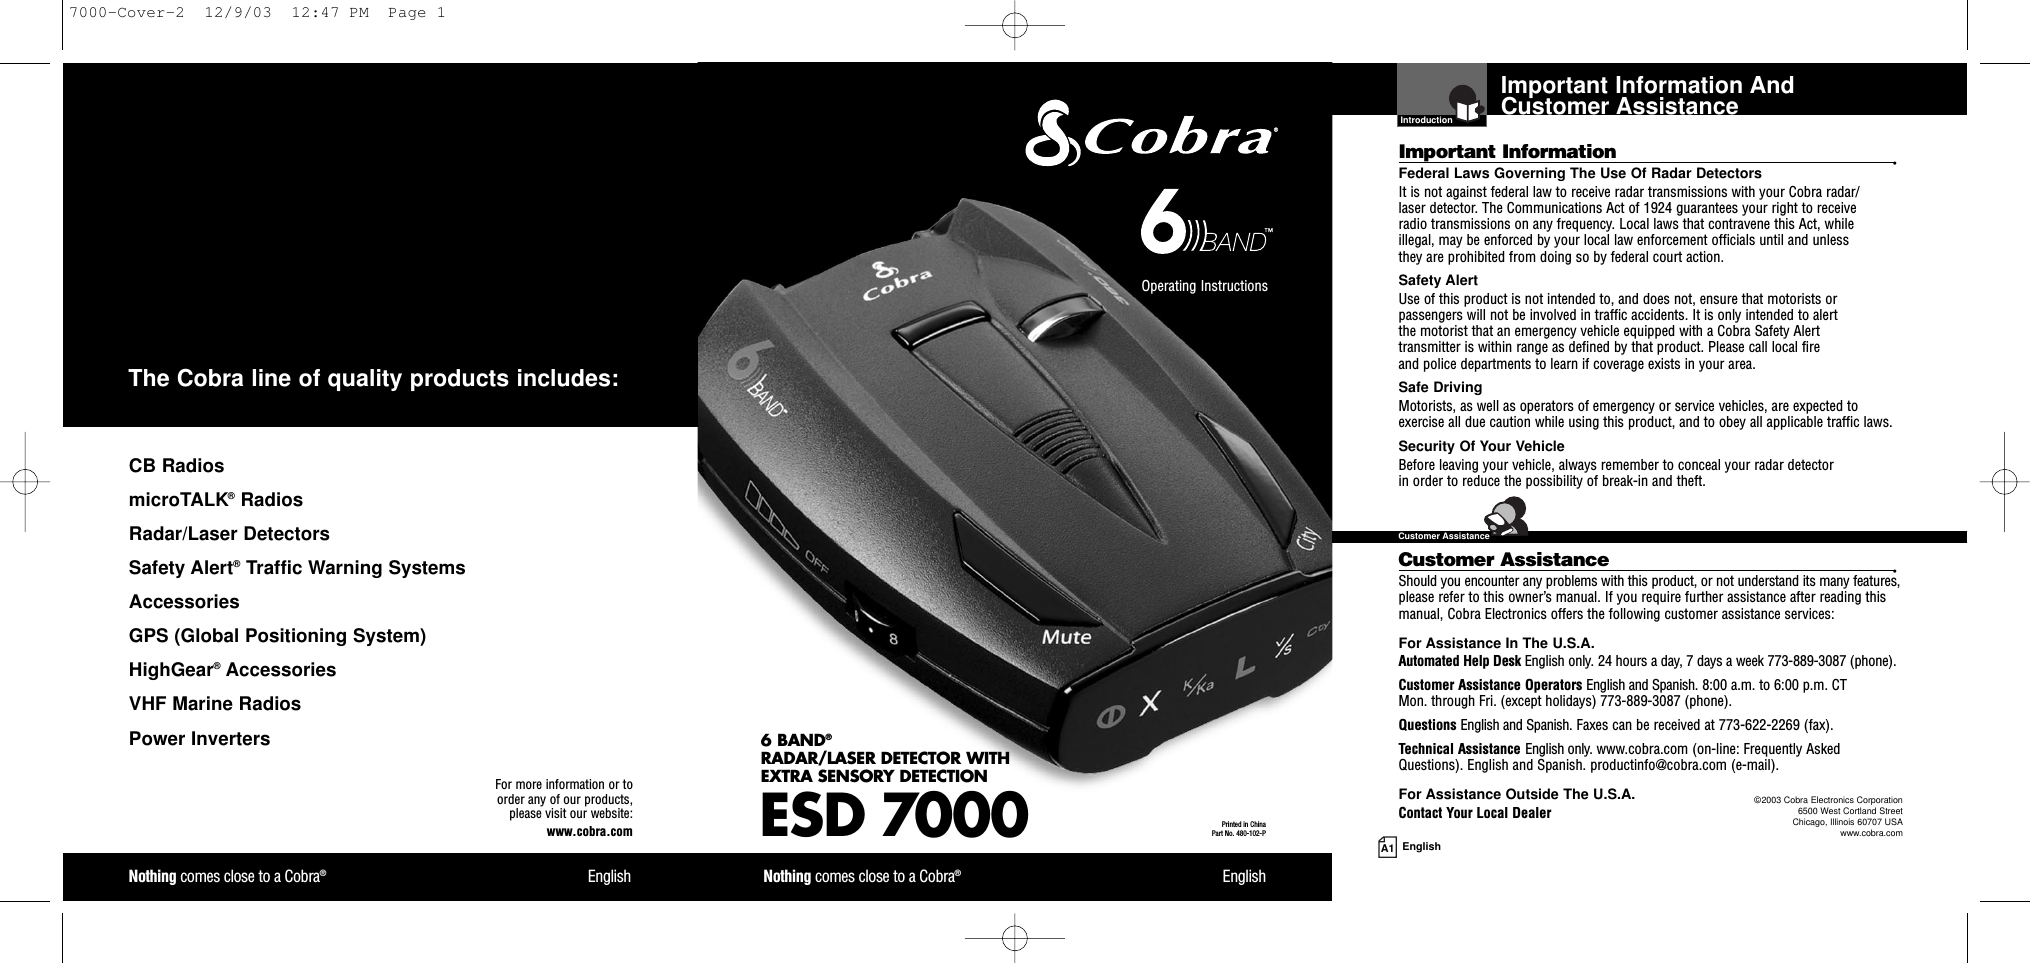 Important Information And Customer AssistanceIntroductionA1 EnglishImportant Information •Federal Laws Governing The Use Of Radar Detectors It is not against federal law to receive radar transmissions with your Cobra radar/laser detector. The Communications Act of 1924 guarantees your right to receive radio transmissions on any frequency. Local laws that contravene this Act, while illegal, may be enforced by your local law enforcement officials until and unless they are prohibited from doing so by federal court action.Safety AlertUse of this product is not intended to, and does not, ensure that motorists orpassengers will not be involved in traffic accidents. It is only intended to alert the motorist that an emergency vehicle equipped with a Cobra Safety Alert transmitter is within range as defined by that product. Please call local fire and police departments to learn if coverage exists in your area.Safe Driving Motorists, as well as operators of emergency or service vehicles, are expected toexercise all due caution while using this product, and to obey all applicable traffic laws.Security Of Your Vehicle Before leaving your vehicle, always remember to conceal your radar detector in order to reduce the possibility of break-in and theft.Customer Assistance •Should you encounter any problems with this product, or not understand its many features,please refer to this owner’s manual. If you require further assistance after reading thismanual, Cobra Electronics offers the following customer assistance services:For Assistance In The U.S.A. Automated Help Desk English only. 24 hours a day, 7 days a week 773-889-3087 (phone).Customer Assistance Operators English and Spanish. 8:00 a.m. to 6:00 p.m. CT Mon. through Fri. (except holidays) 773-889-3087 (phone).Questions English and Spanish. Faxes can be received at 773-622-2269 (fax).Technical Assistance English only. www.cobra.com (on-line: Frequently AskedQuestions). English and Spanish. productinfo@cobra.com (e-mail).For Assistance Outside The U.S.A. Contact Your Local DealerESD 70006 BAND®RADAR/LASER DETECTOR WITH EXTRA SENSORY DETECTIONNothing comes close to a Cobra®EnglishNothing comes close to a Cobra®EnglishOperating Instructions Printed in China Part No. 480-102-PFor more information or to order any of our products, please visit our website:www.cobra.com©2003 Cobra Electronics Corporation6500 West Cortland StreetChicago, Illinois 60707 USAwww.cobra.comCB RadiosmicroTALK®RadiosRadar/Laser Detectors Safety Alert®Traffic Warning SystemsAccessories GPS (Global Positioning System)HighGear®Accessories  VHF Marine Radios  Power InvertersThe Cobra line of quality products includes:Customer Assistance7000-Cover-2  12/9/03  12:47 PM  Page 1